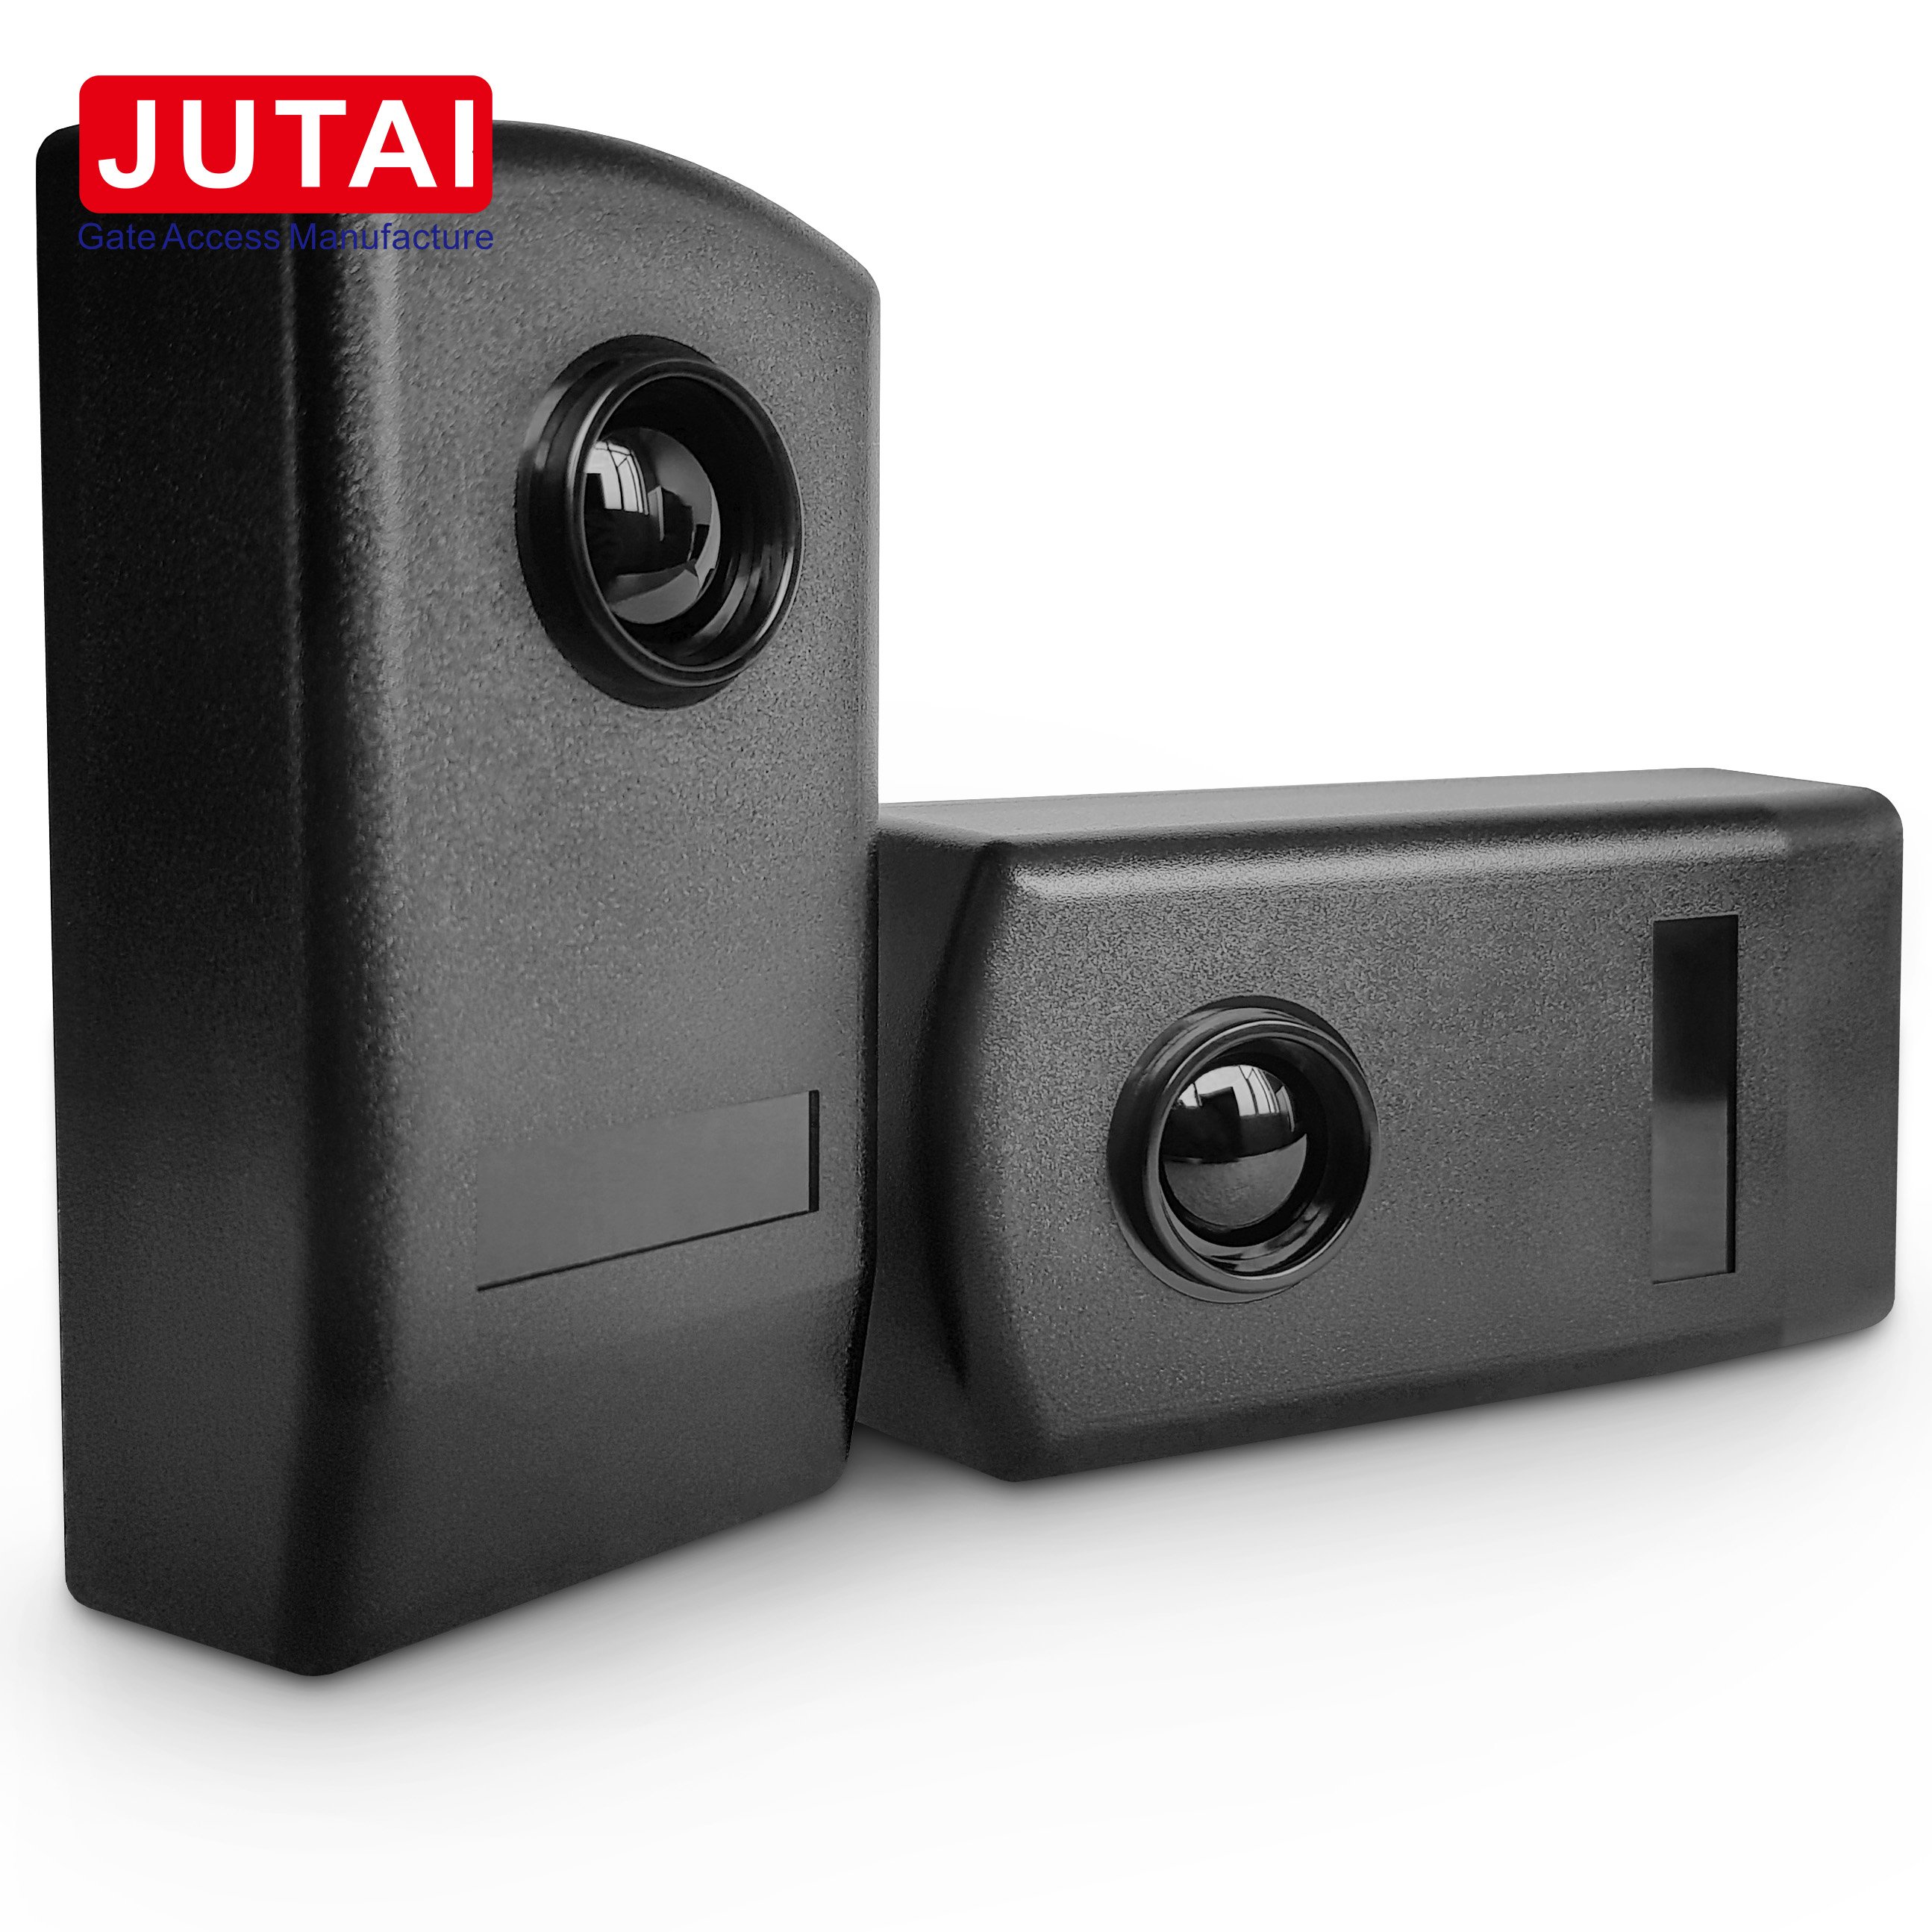 Infrared Photocell Beam Sensors For Automatic Gate Access System JUTAI